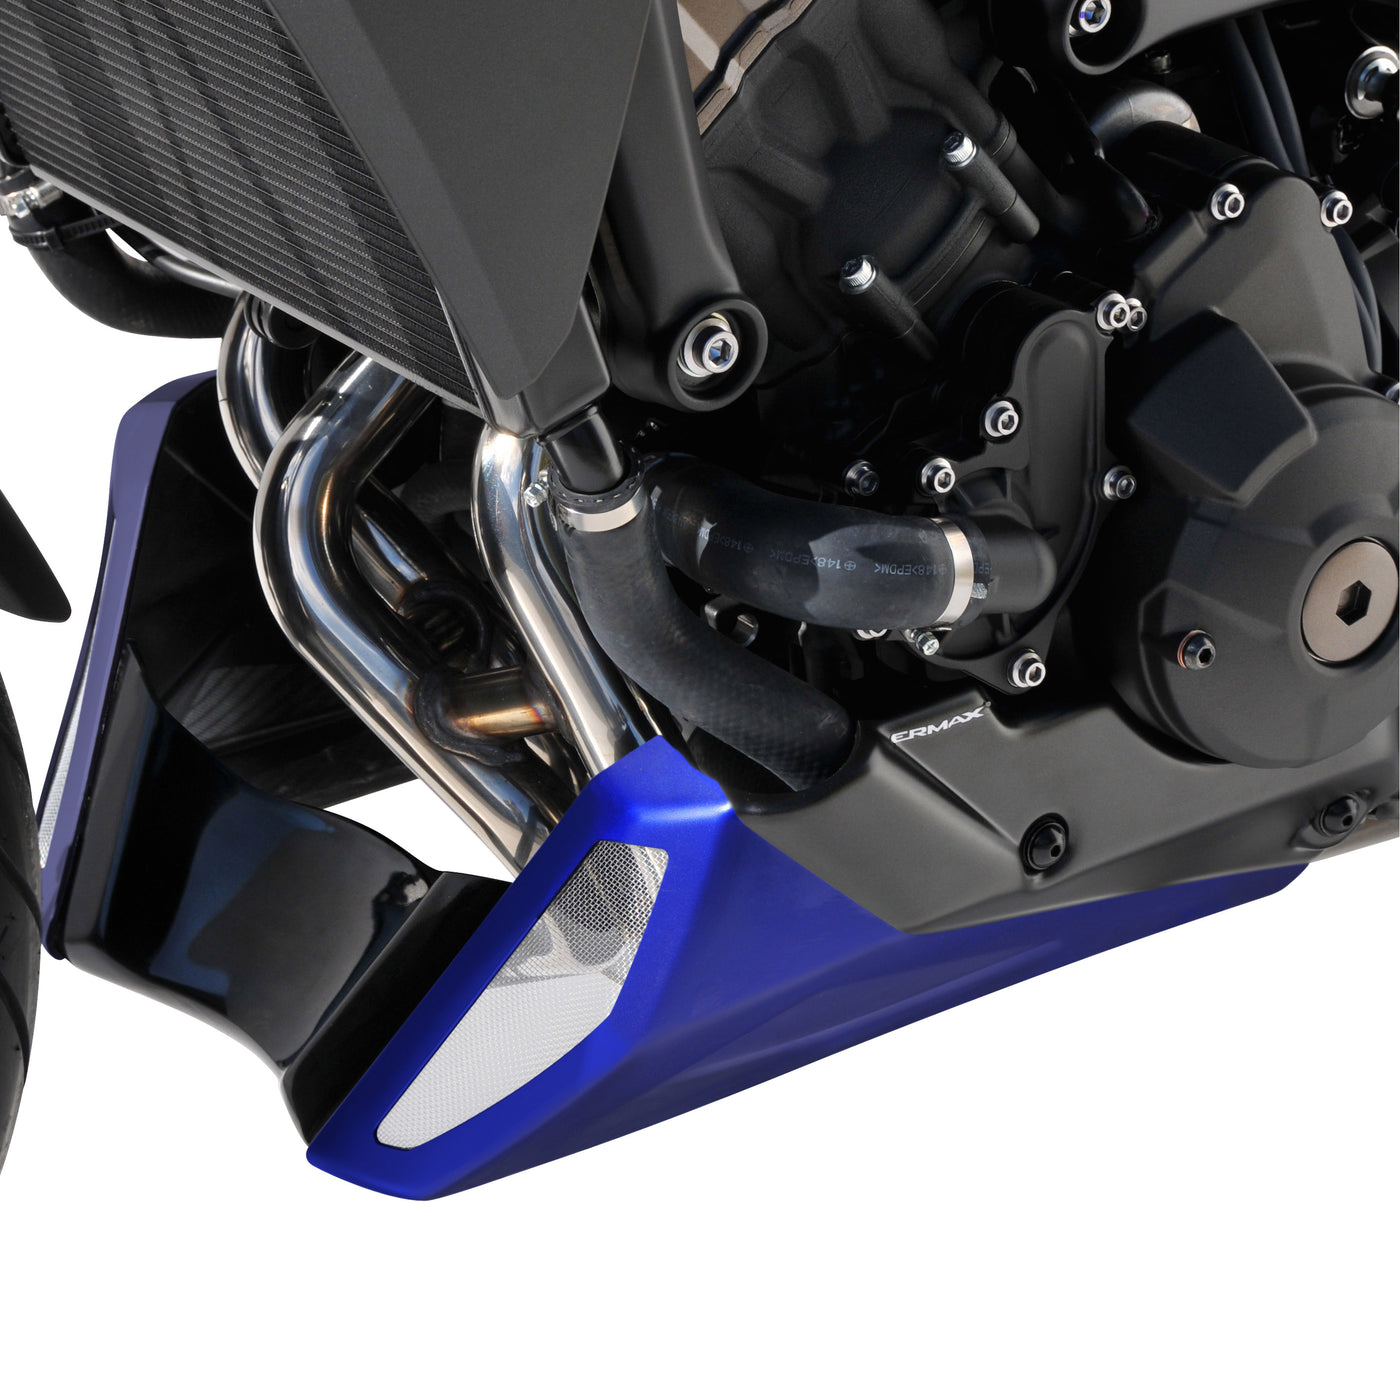 Belly Pan for YAMAHA Tracer 900 (2018-2020)